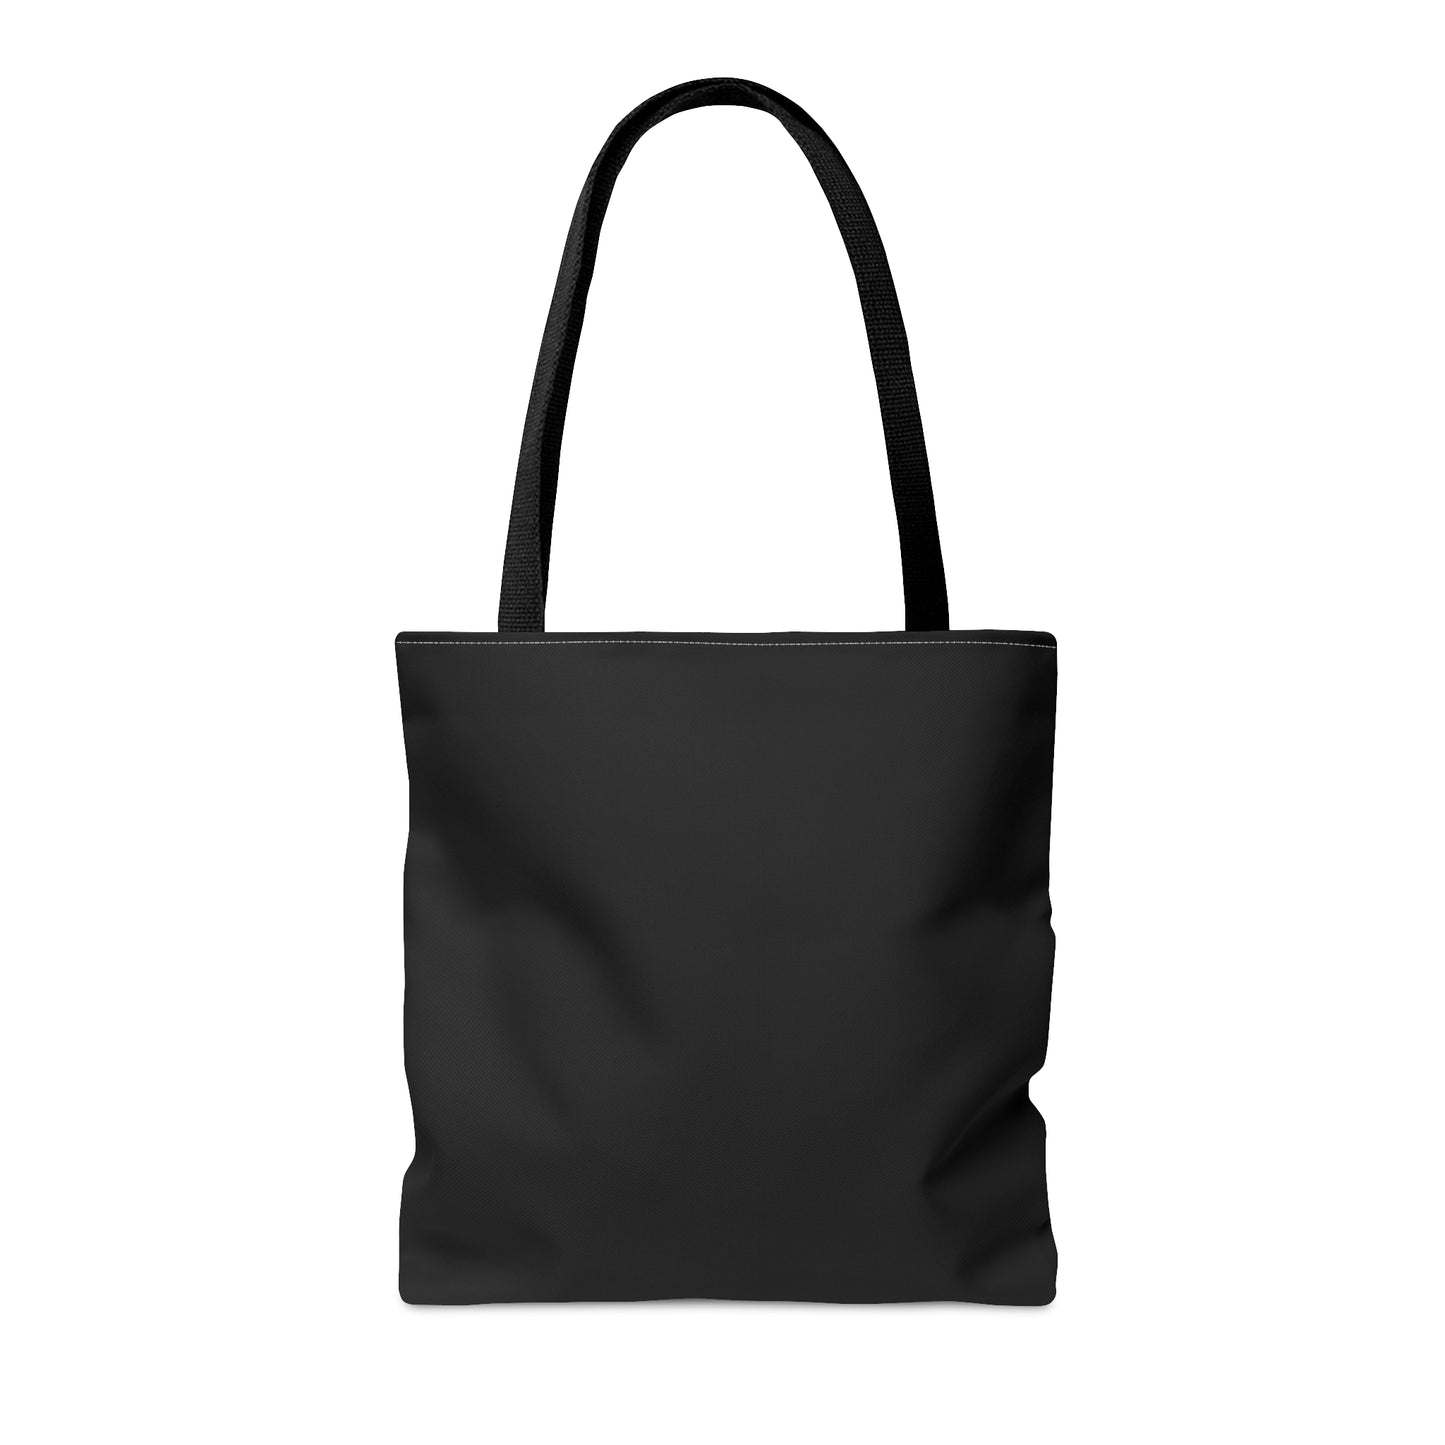 Claimed By God Purpose Over Pain Christian Tote Bag Printify